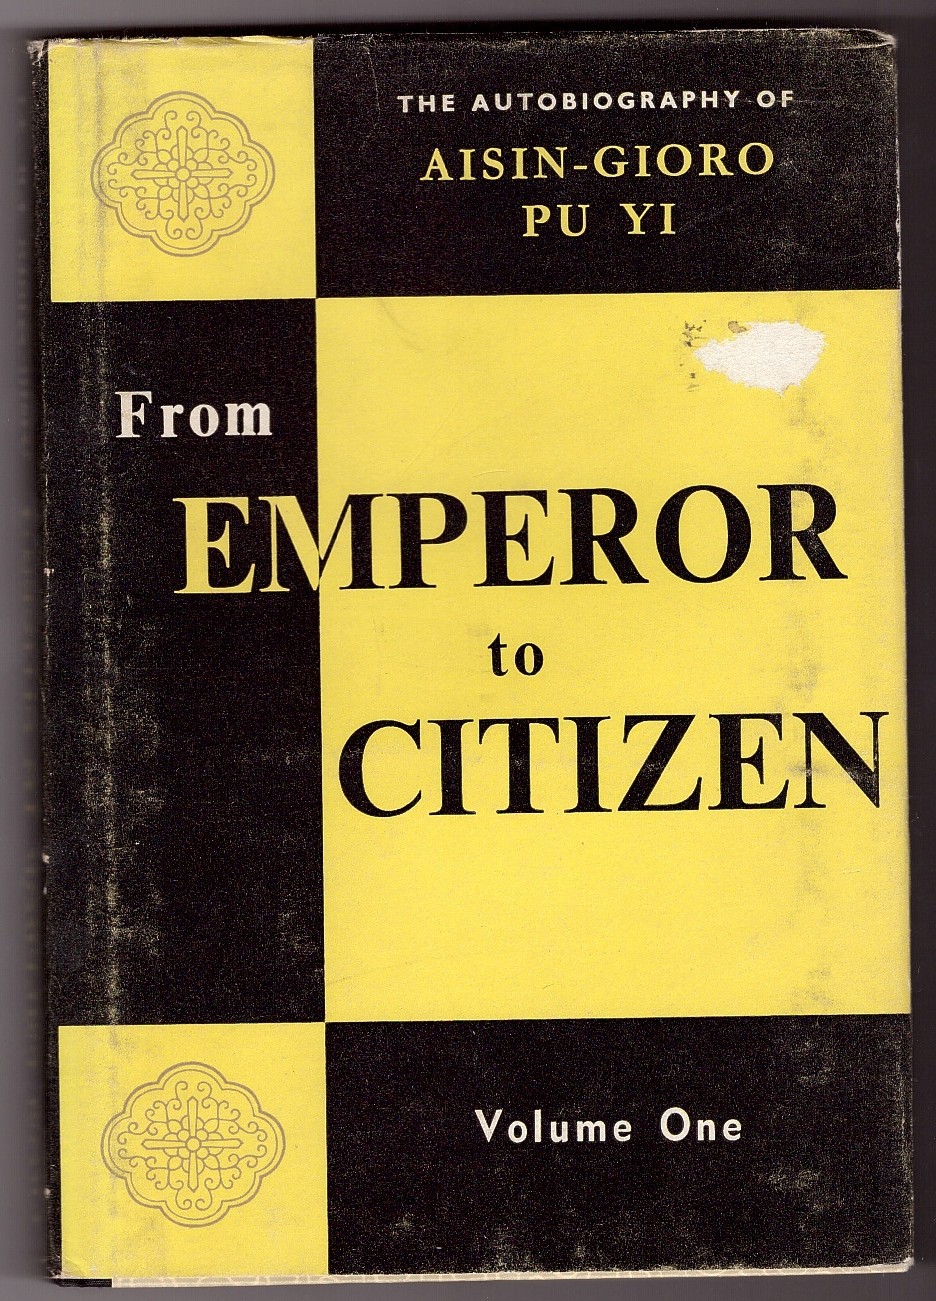 PU YI; W.J.F. JENNER (TRANSLATOR) - From Emperor to Citizen the Autobiography of Aisin